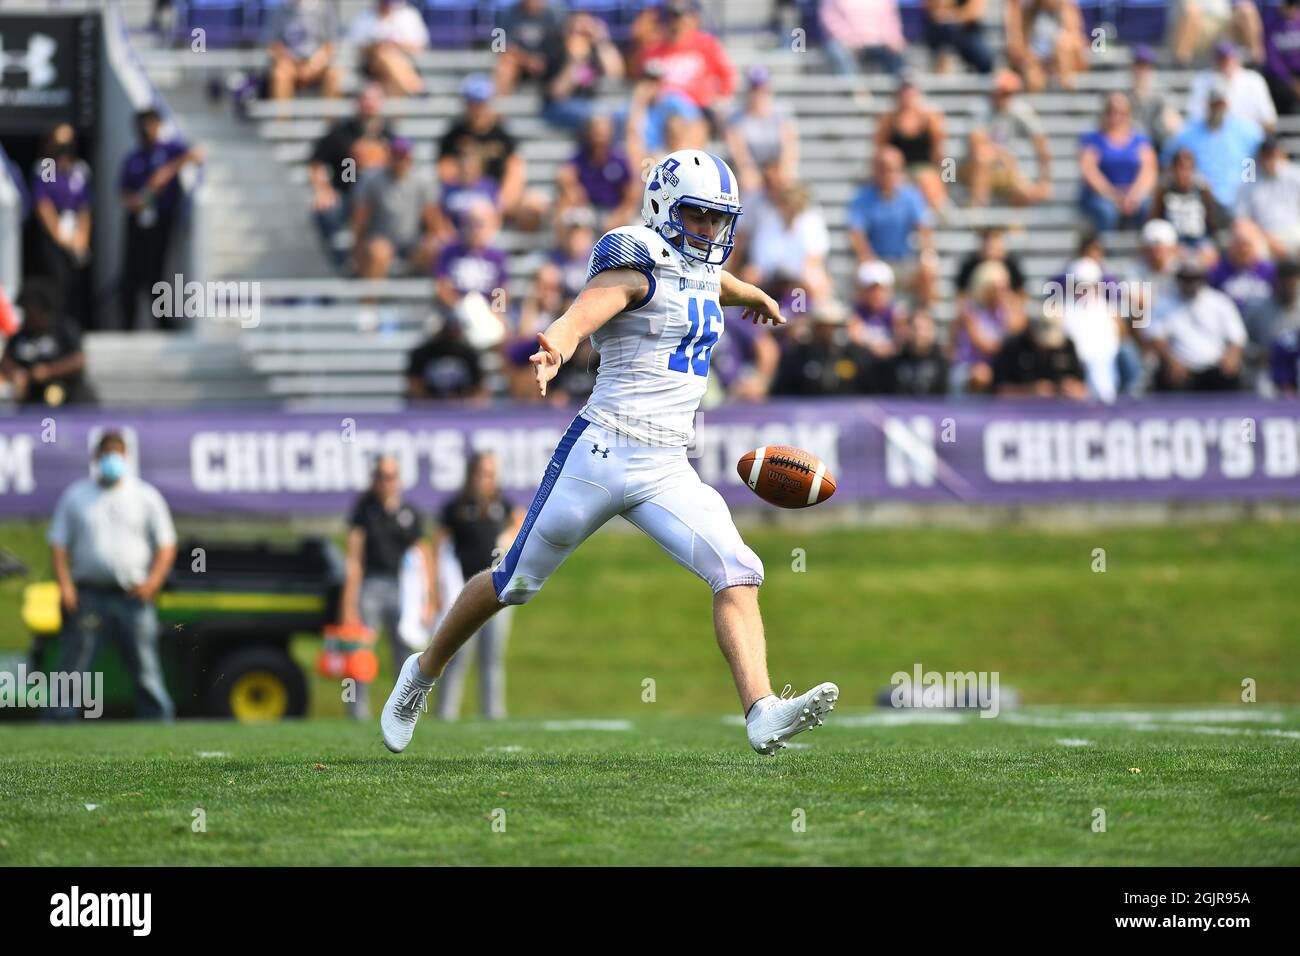 Evanston, Illinois, USA. 11th Sep, 2021. Cade Chambers #16 of the Indiana State Sycamores in action during the NCAA football game between the Northwestern Wildcats vs Indiana State Sycamores at Ryan Field in Evanston, Illinois. Dean Reid/CSM/Alamy Live News Stock Photo